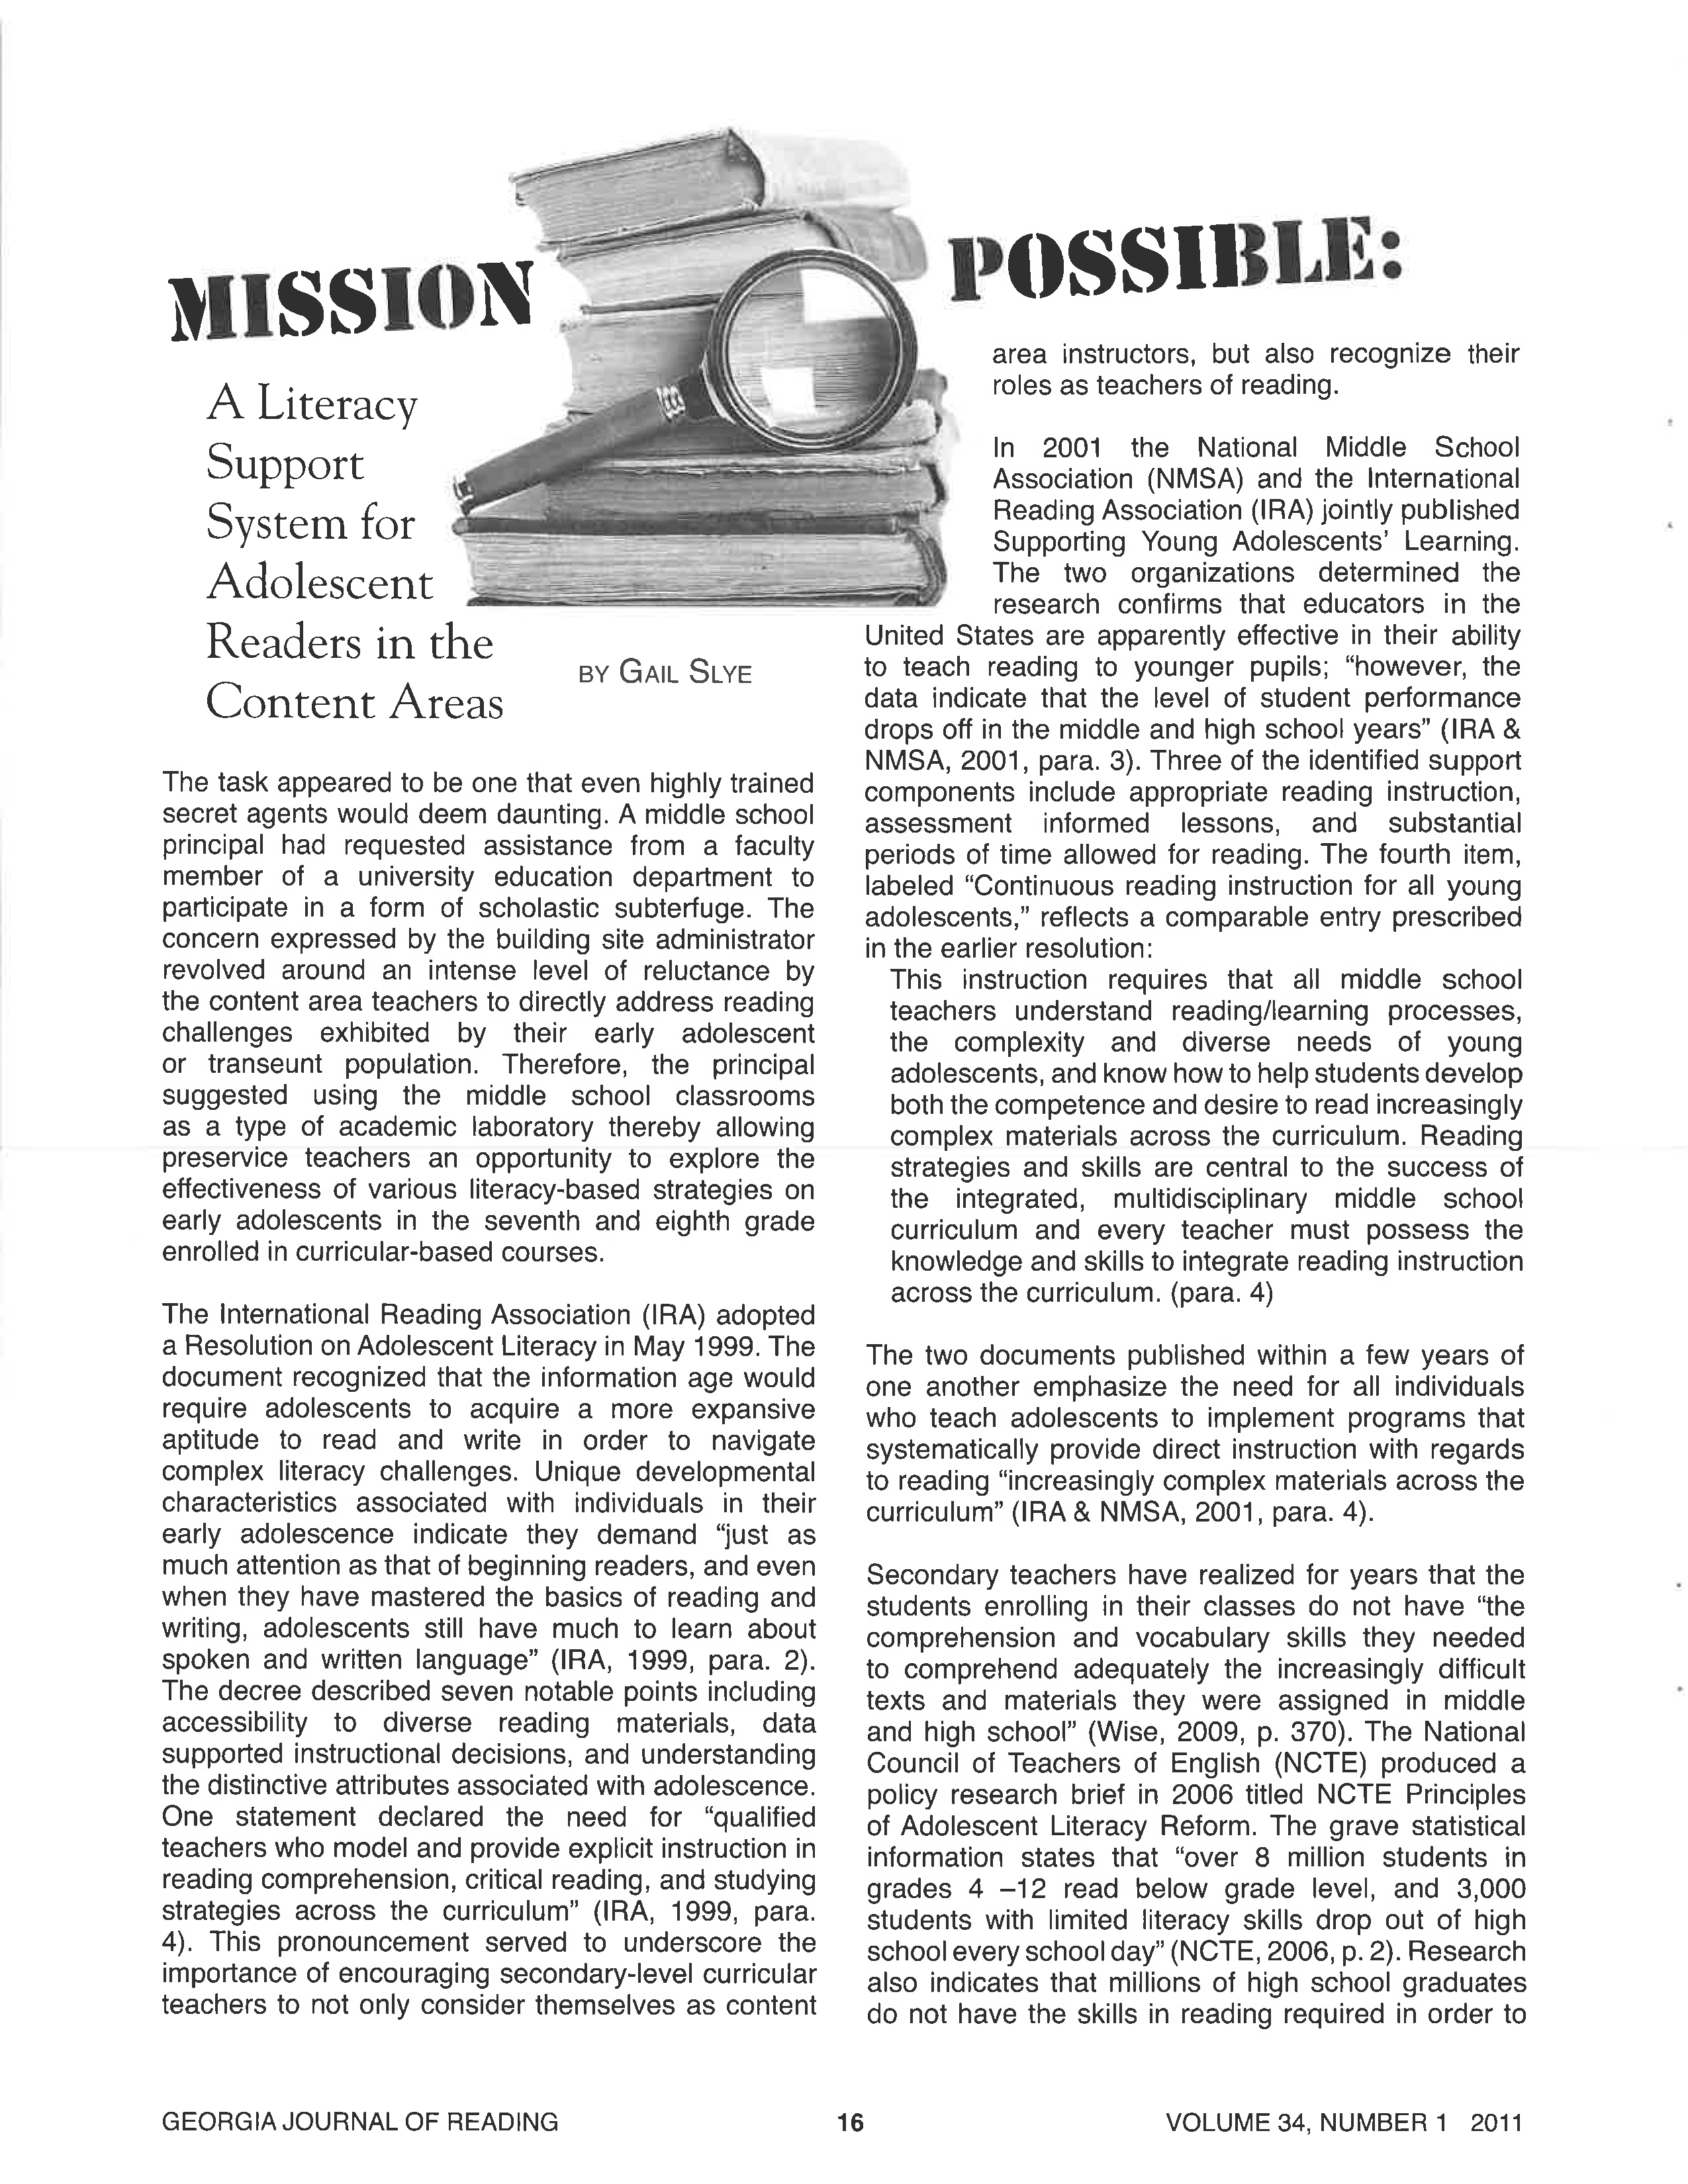 Mission Possible: A Literacy Support System for Adolescent Readers